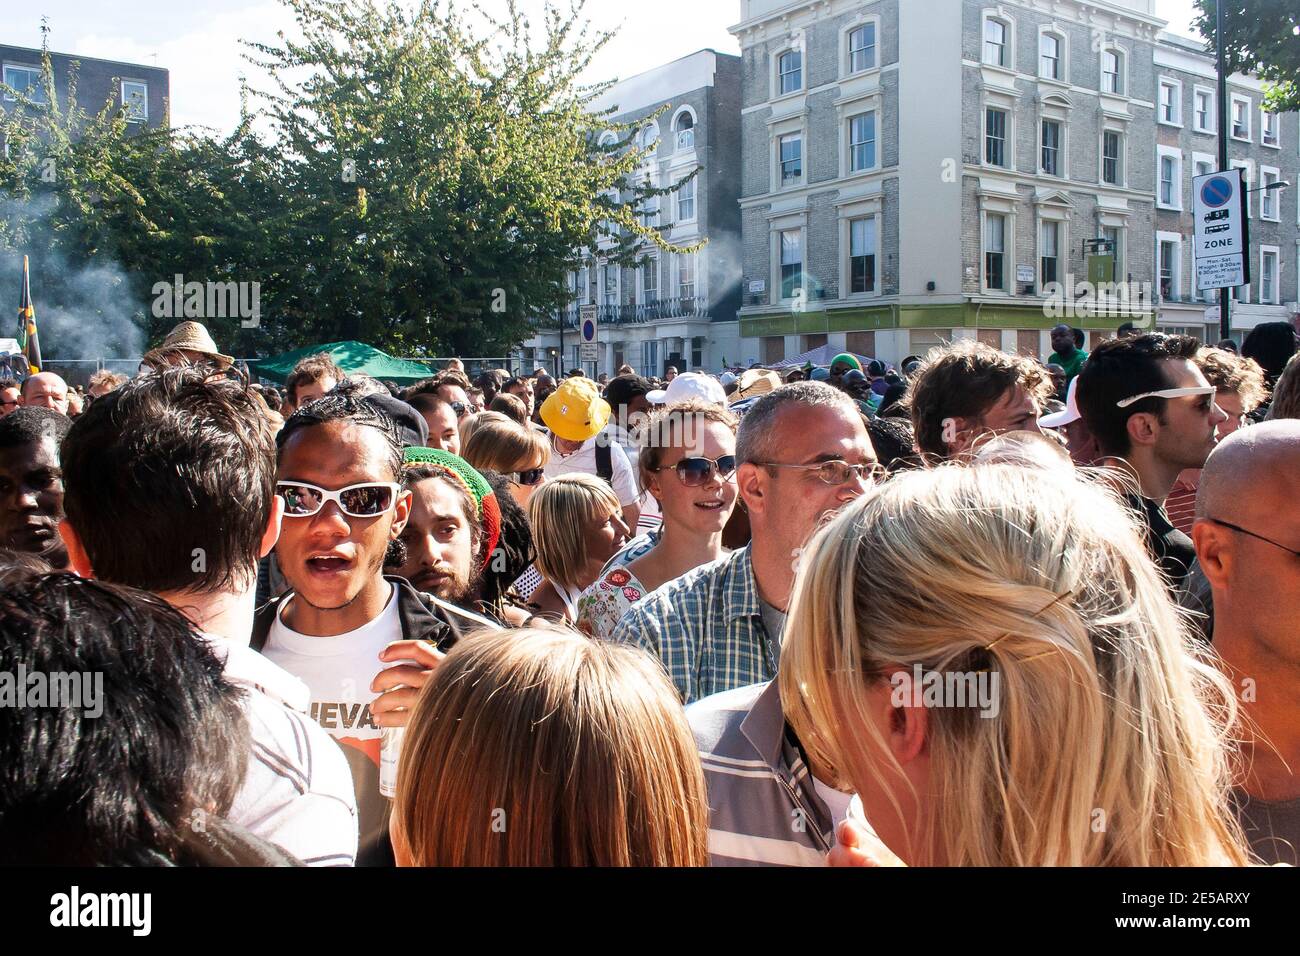 Crowds and congestion at Notting Hill Carnival, London Stock Photo